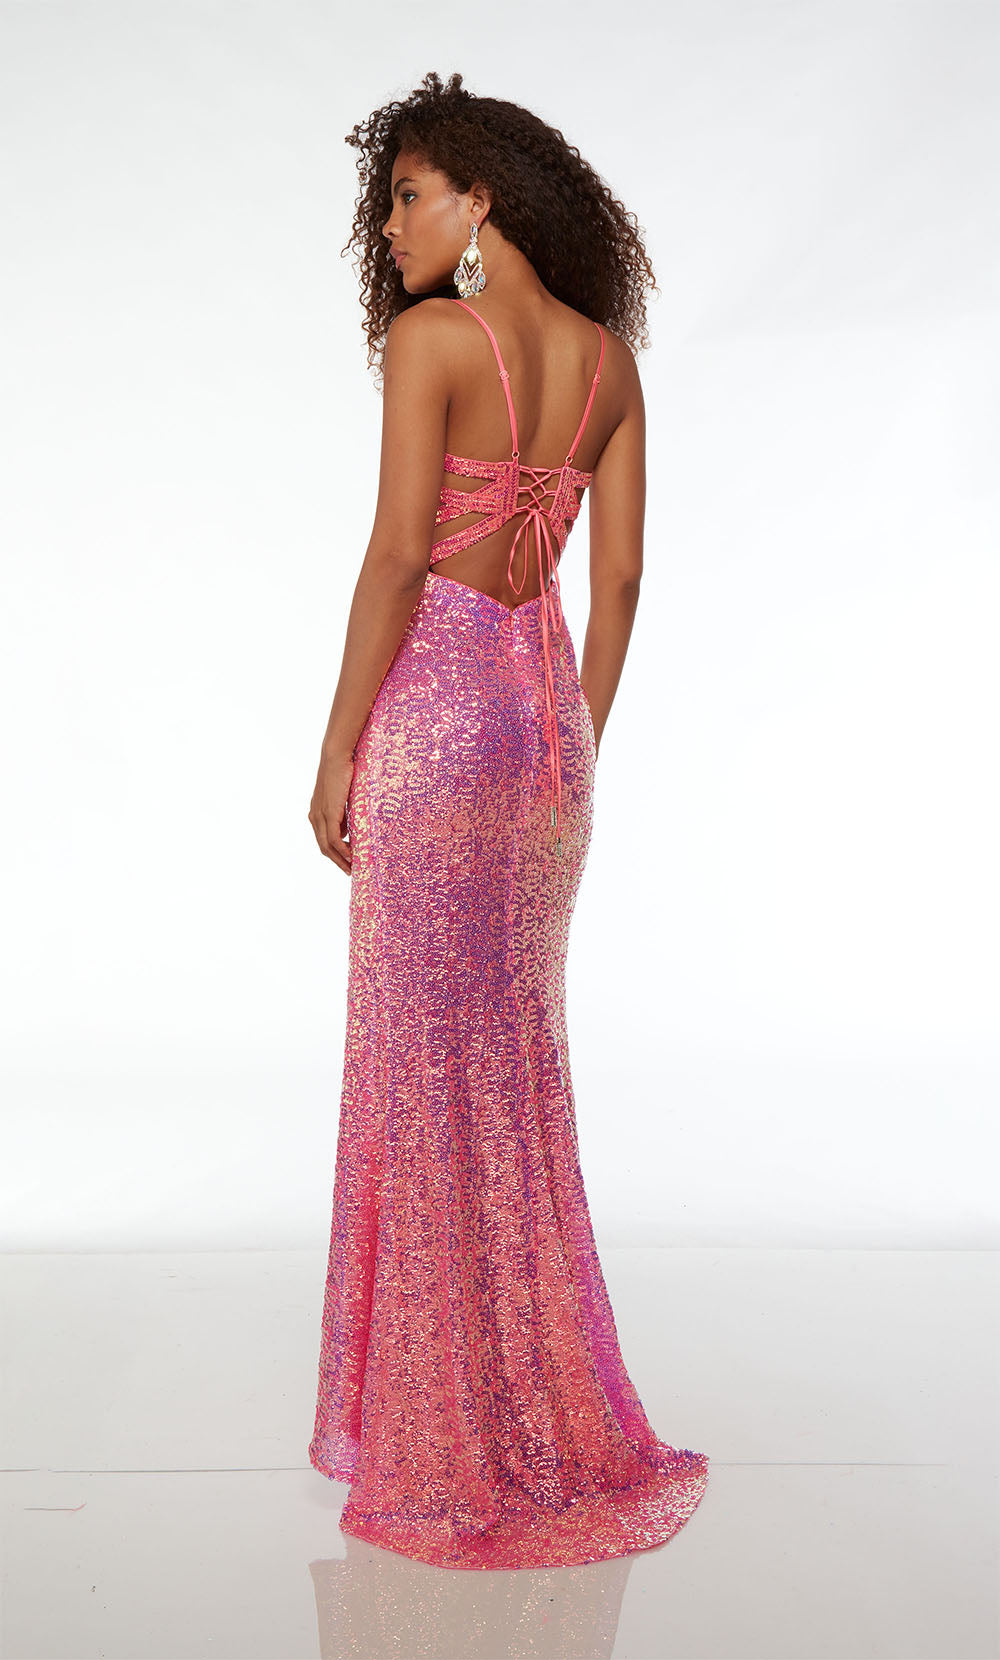 Alyce-61556-Plunging-Neckline-Strappy-Back-Front-Slit-Sequins-Straight-Barbie-Pink-Evening-Dress-B-Chic-Fashions-Prom-Dress